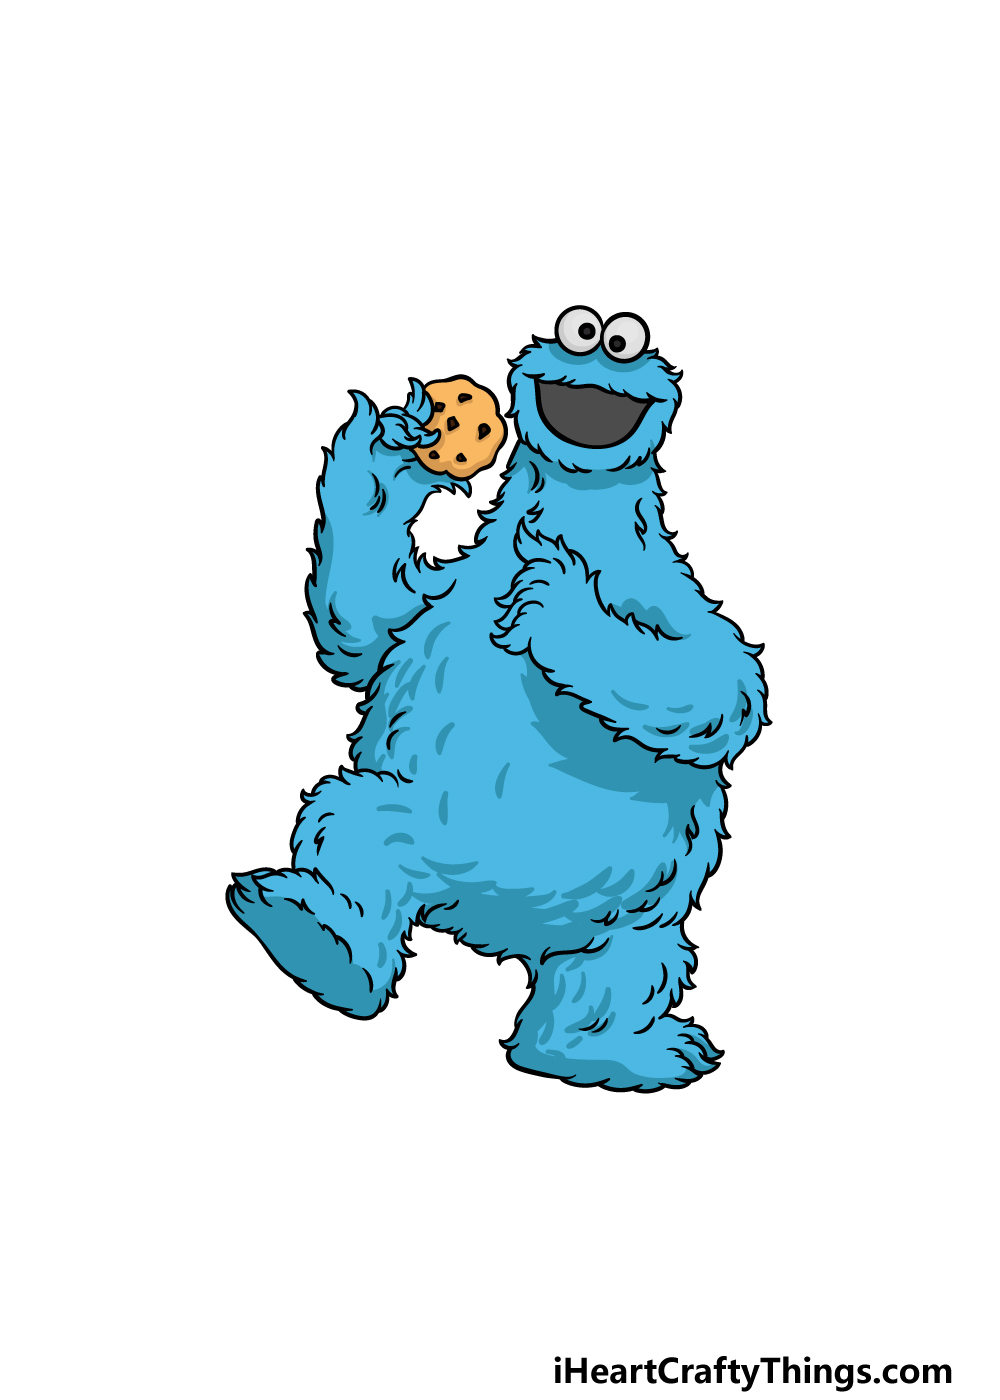 Cookie Monster Drawing - How To Draw Cookie Monster Step By Step